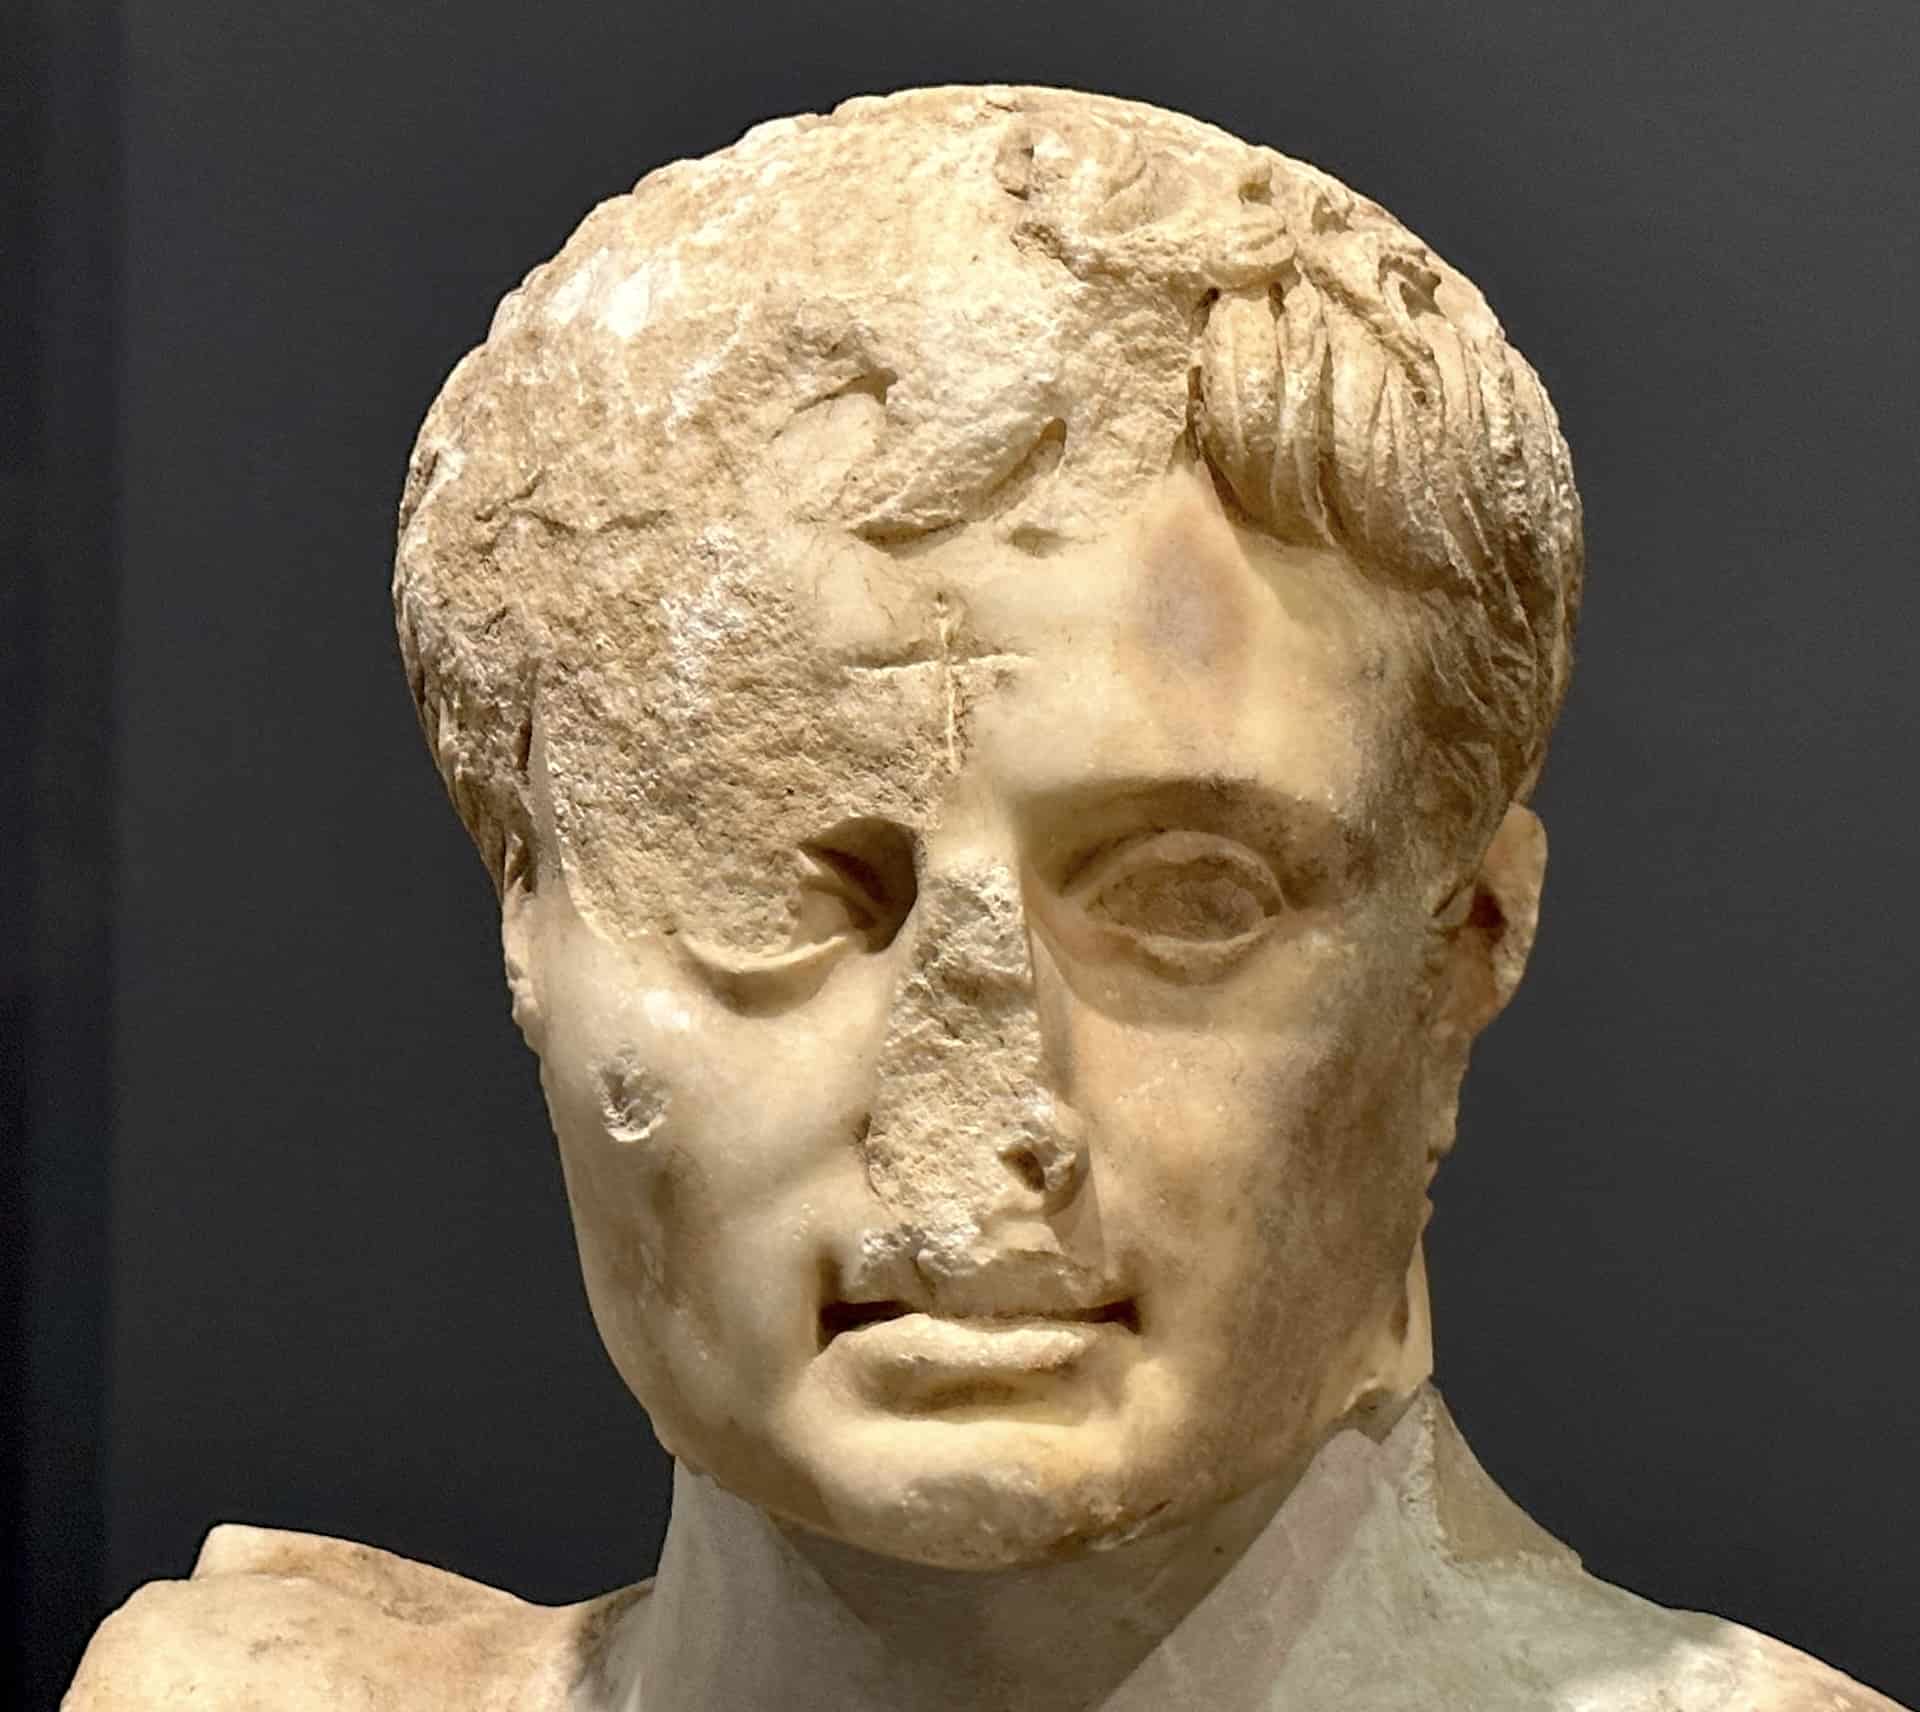 Cross carved into the head of Emperor Augustus